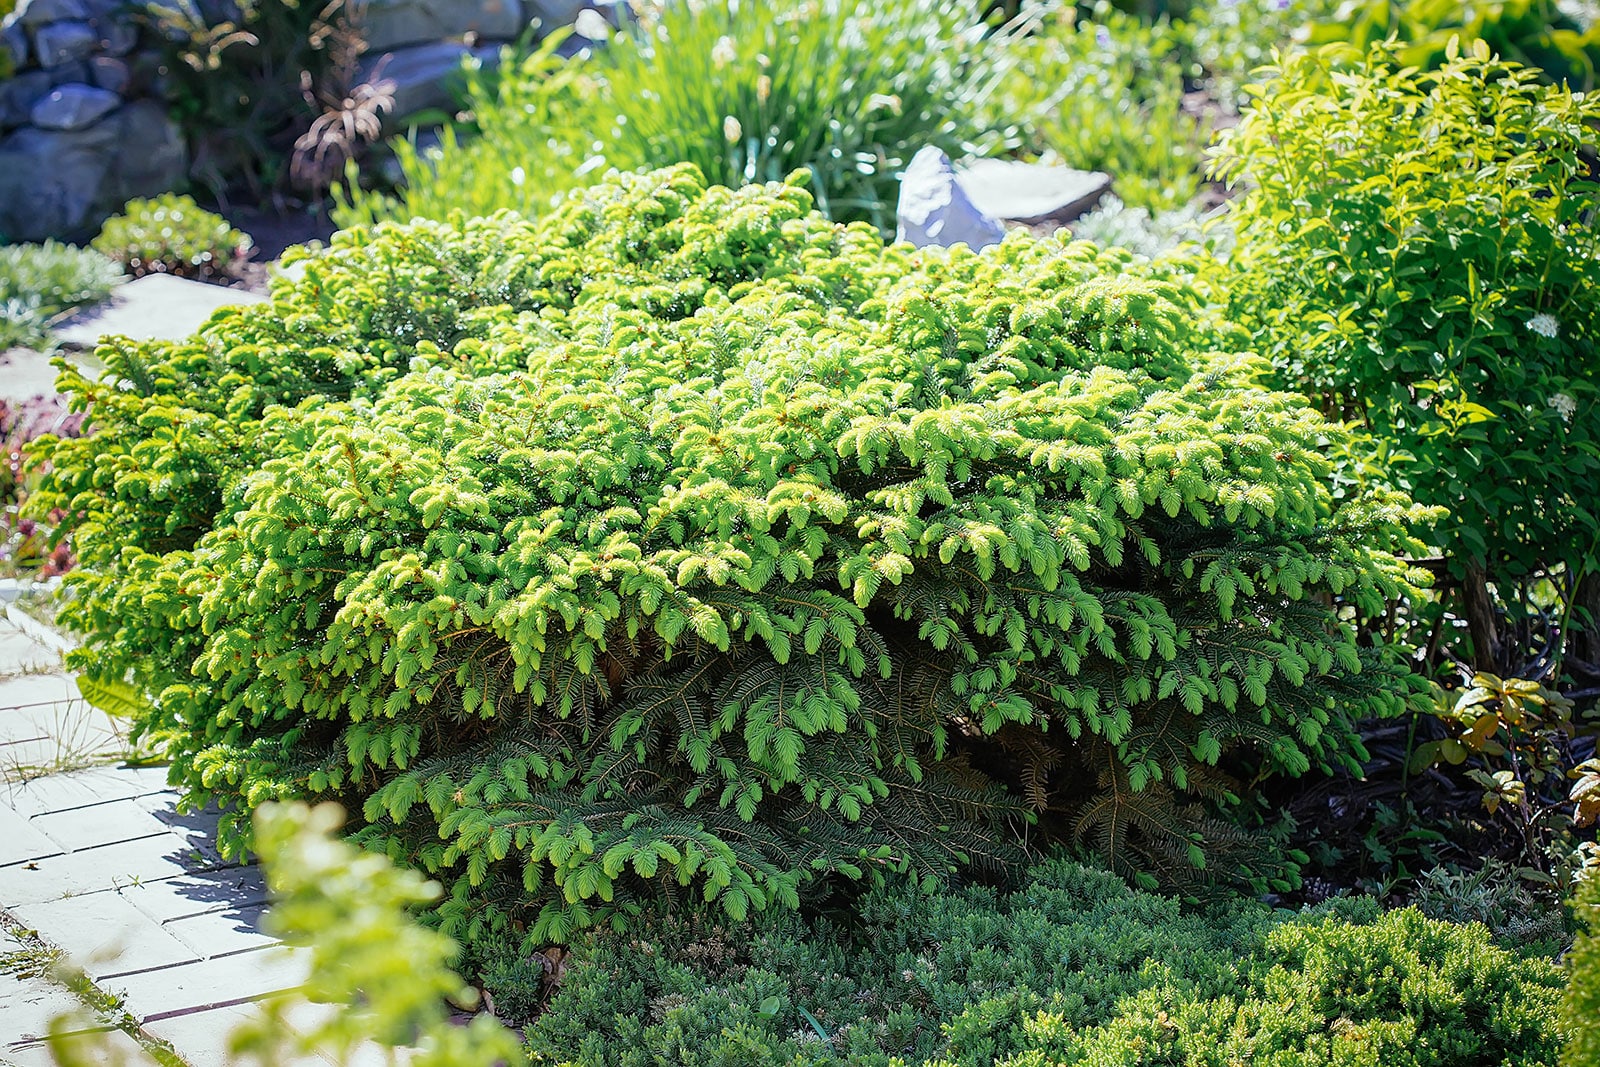 Bird's nest spruce ground cover in a garden surrounded by other plants